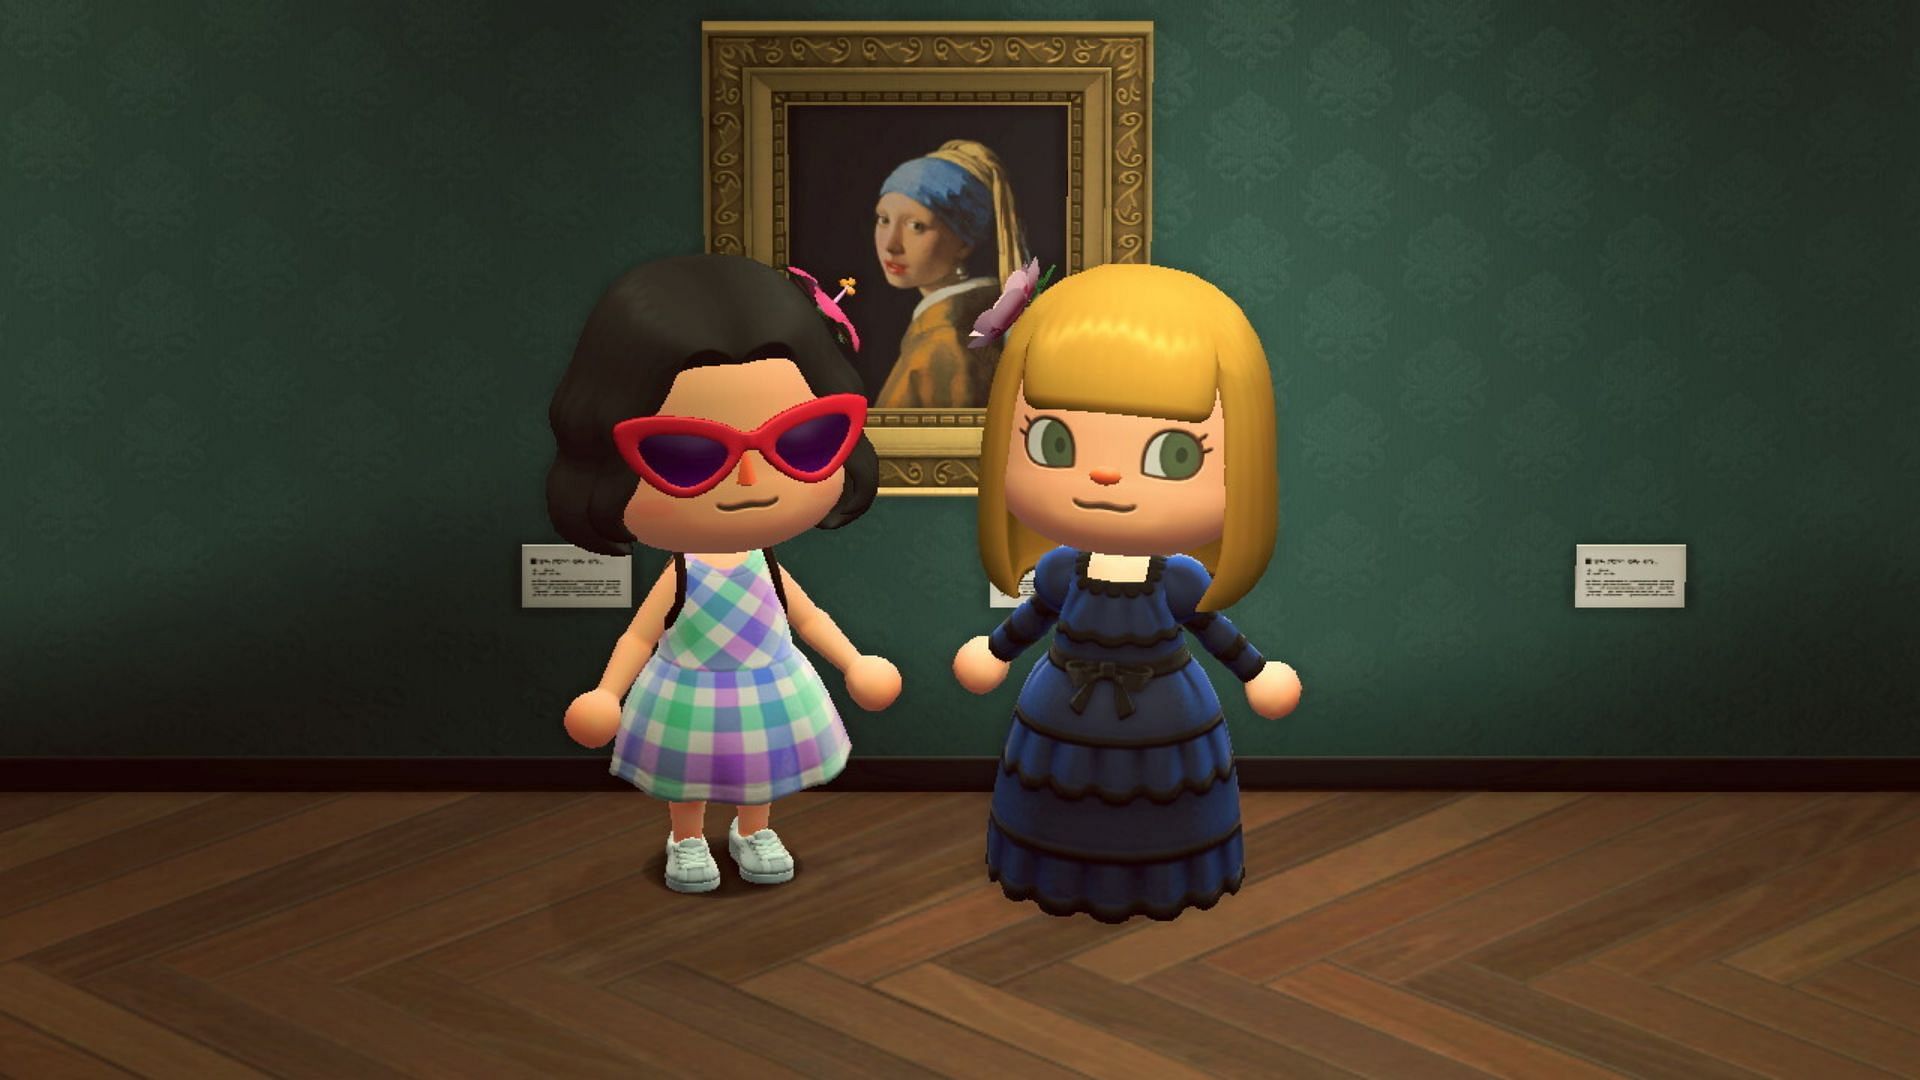 How to distinguish between real and fake art in Animal Crossing: New Horizons (Image via Sartle)